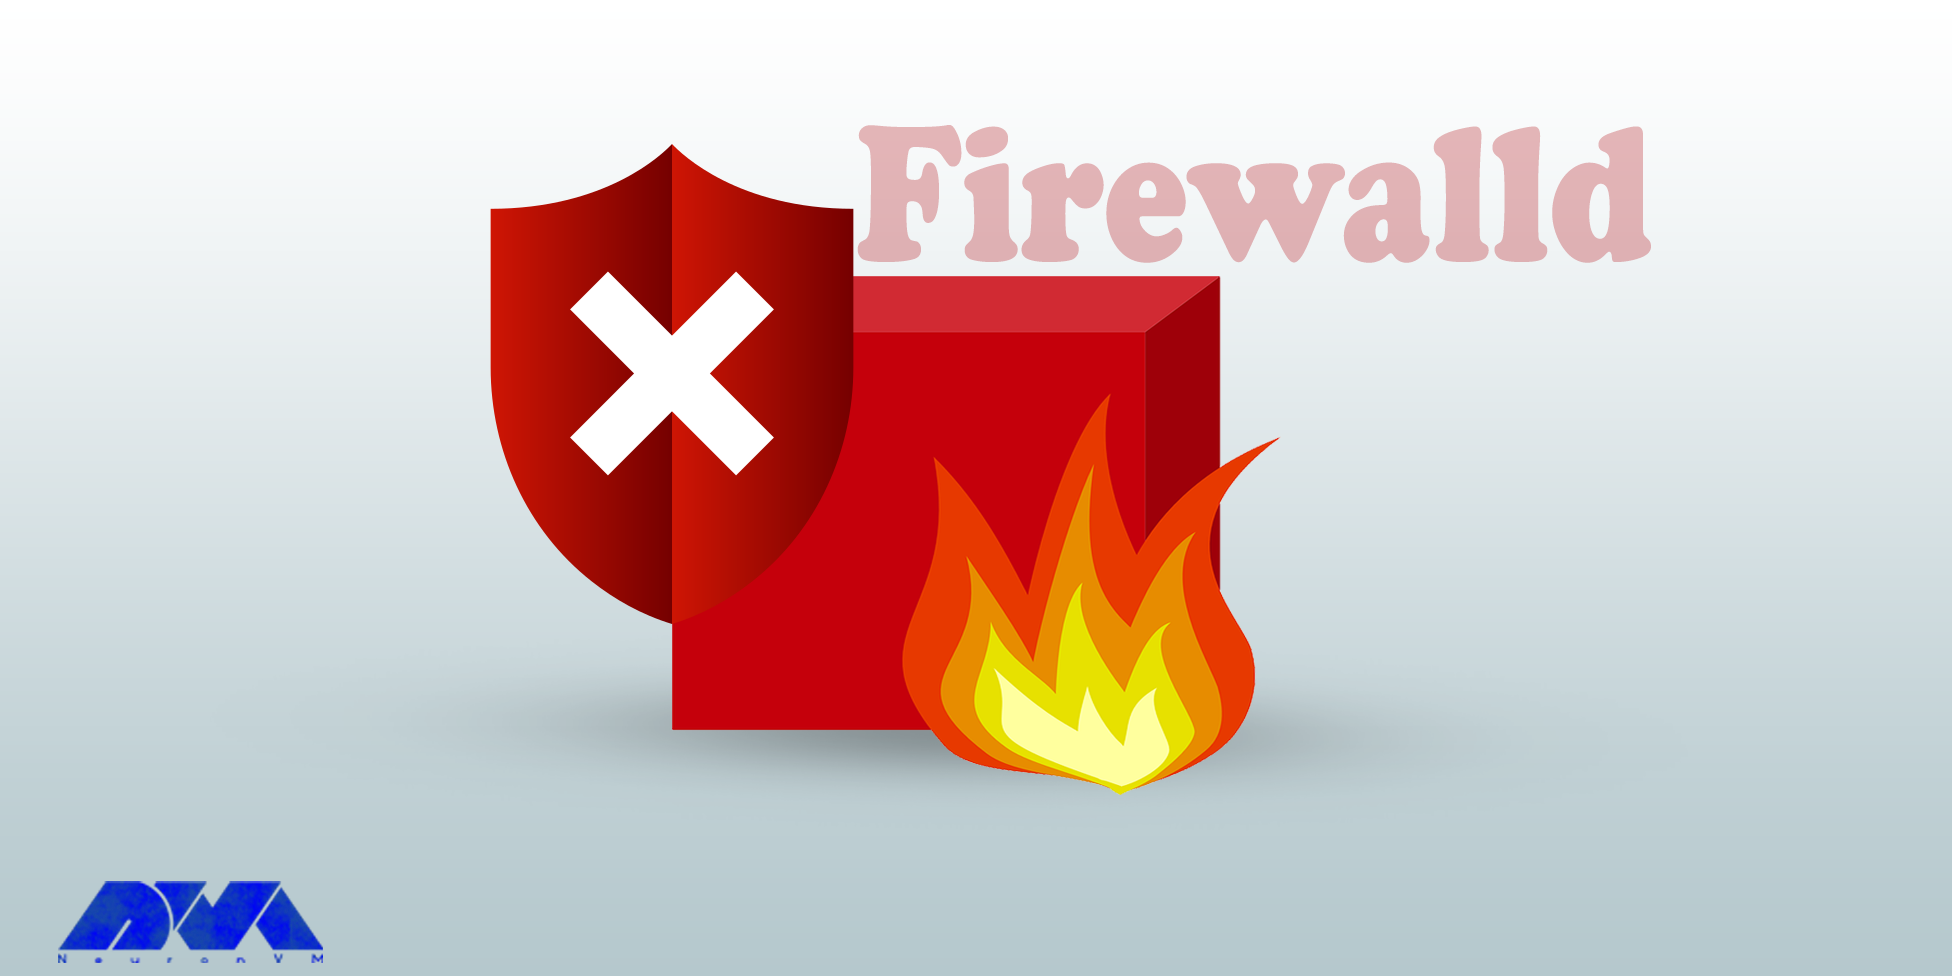 disable firewall on centos